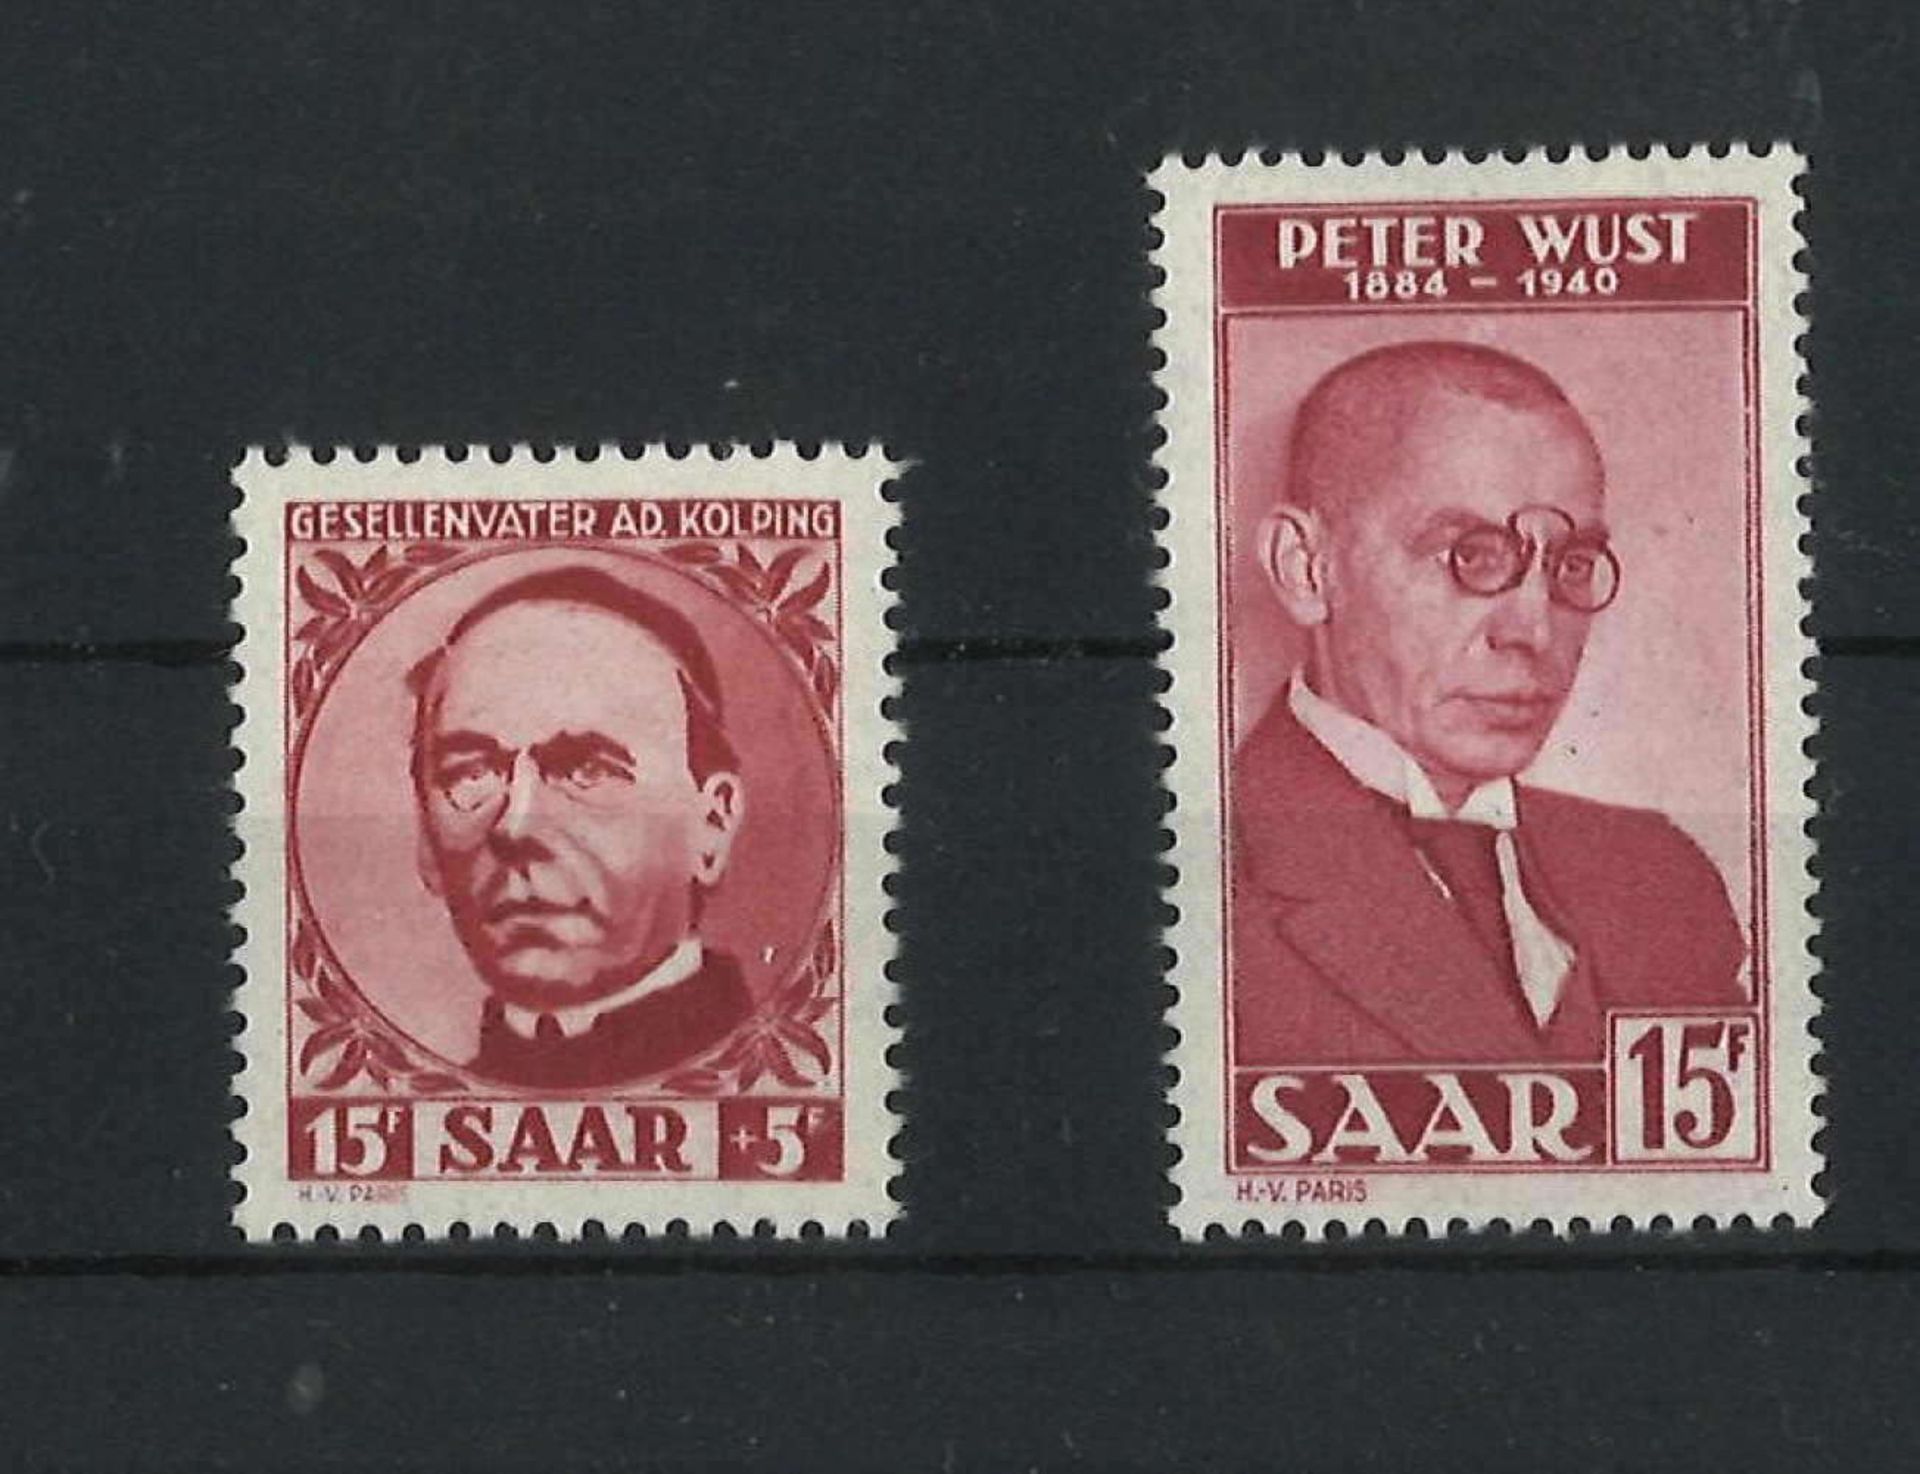 Saarland 1950, Michel No. 289-290, Kolping and Wust died. Catalog price 48 euros